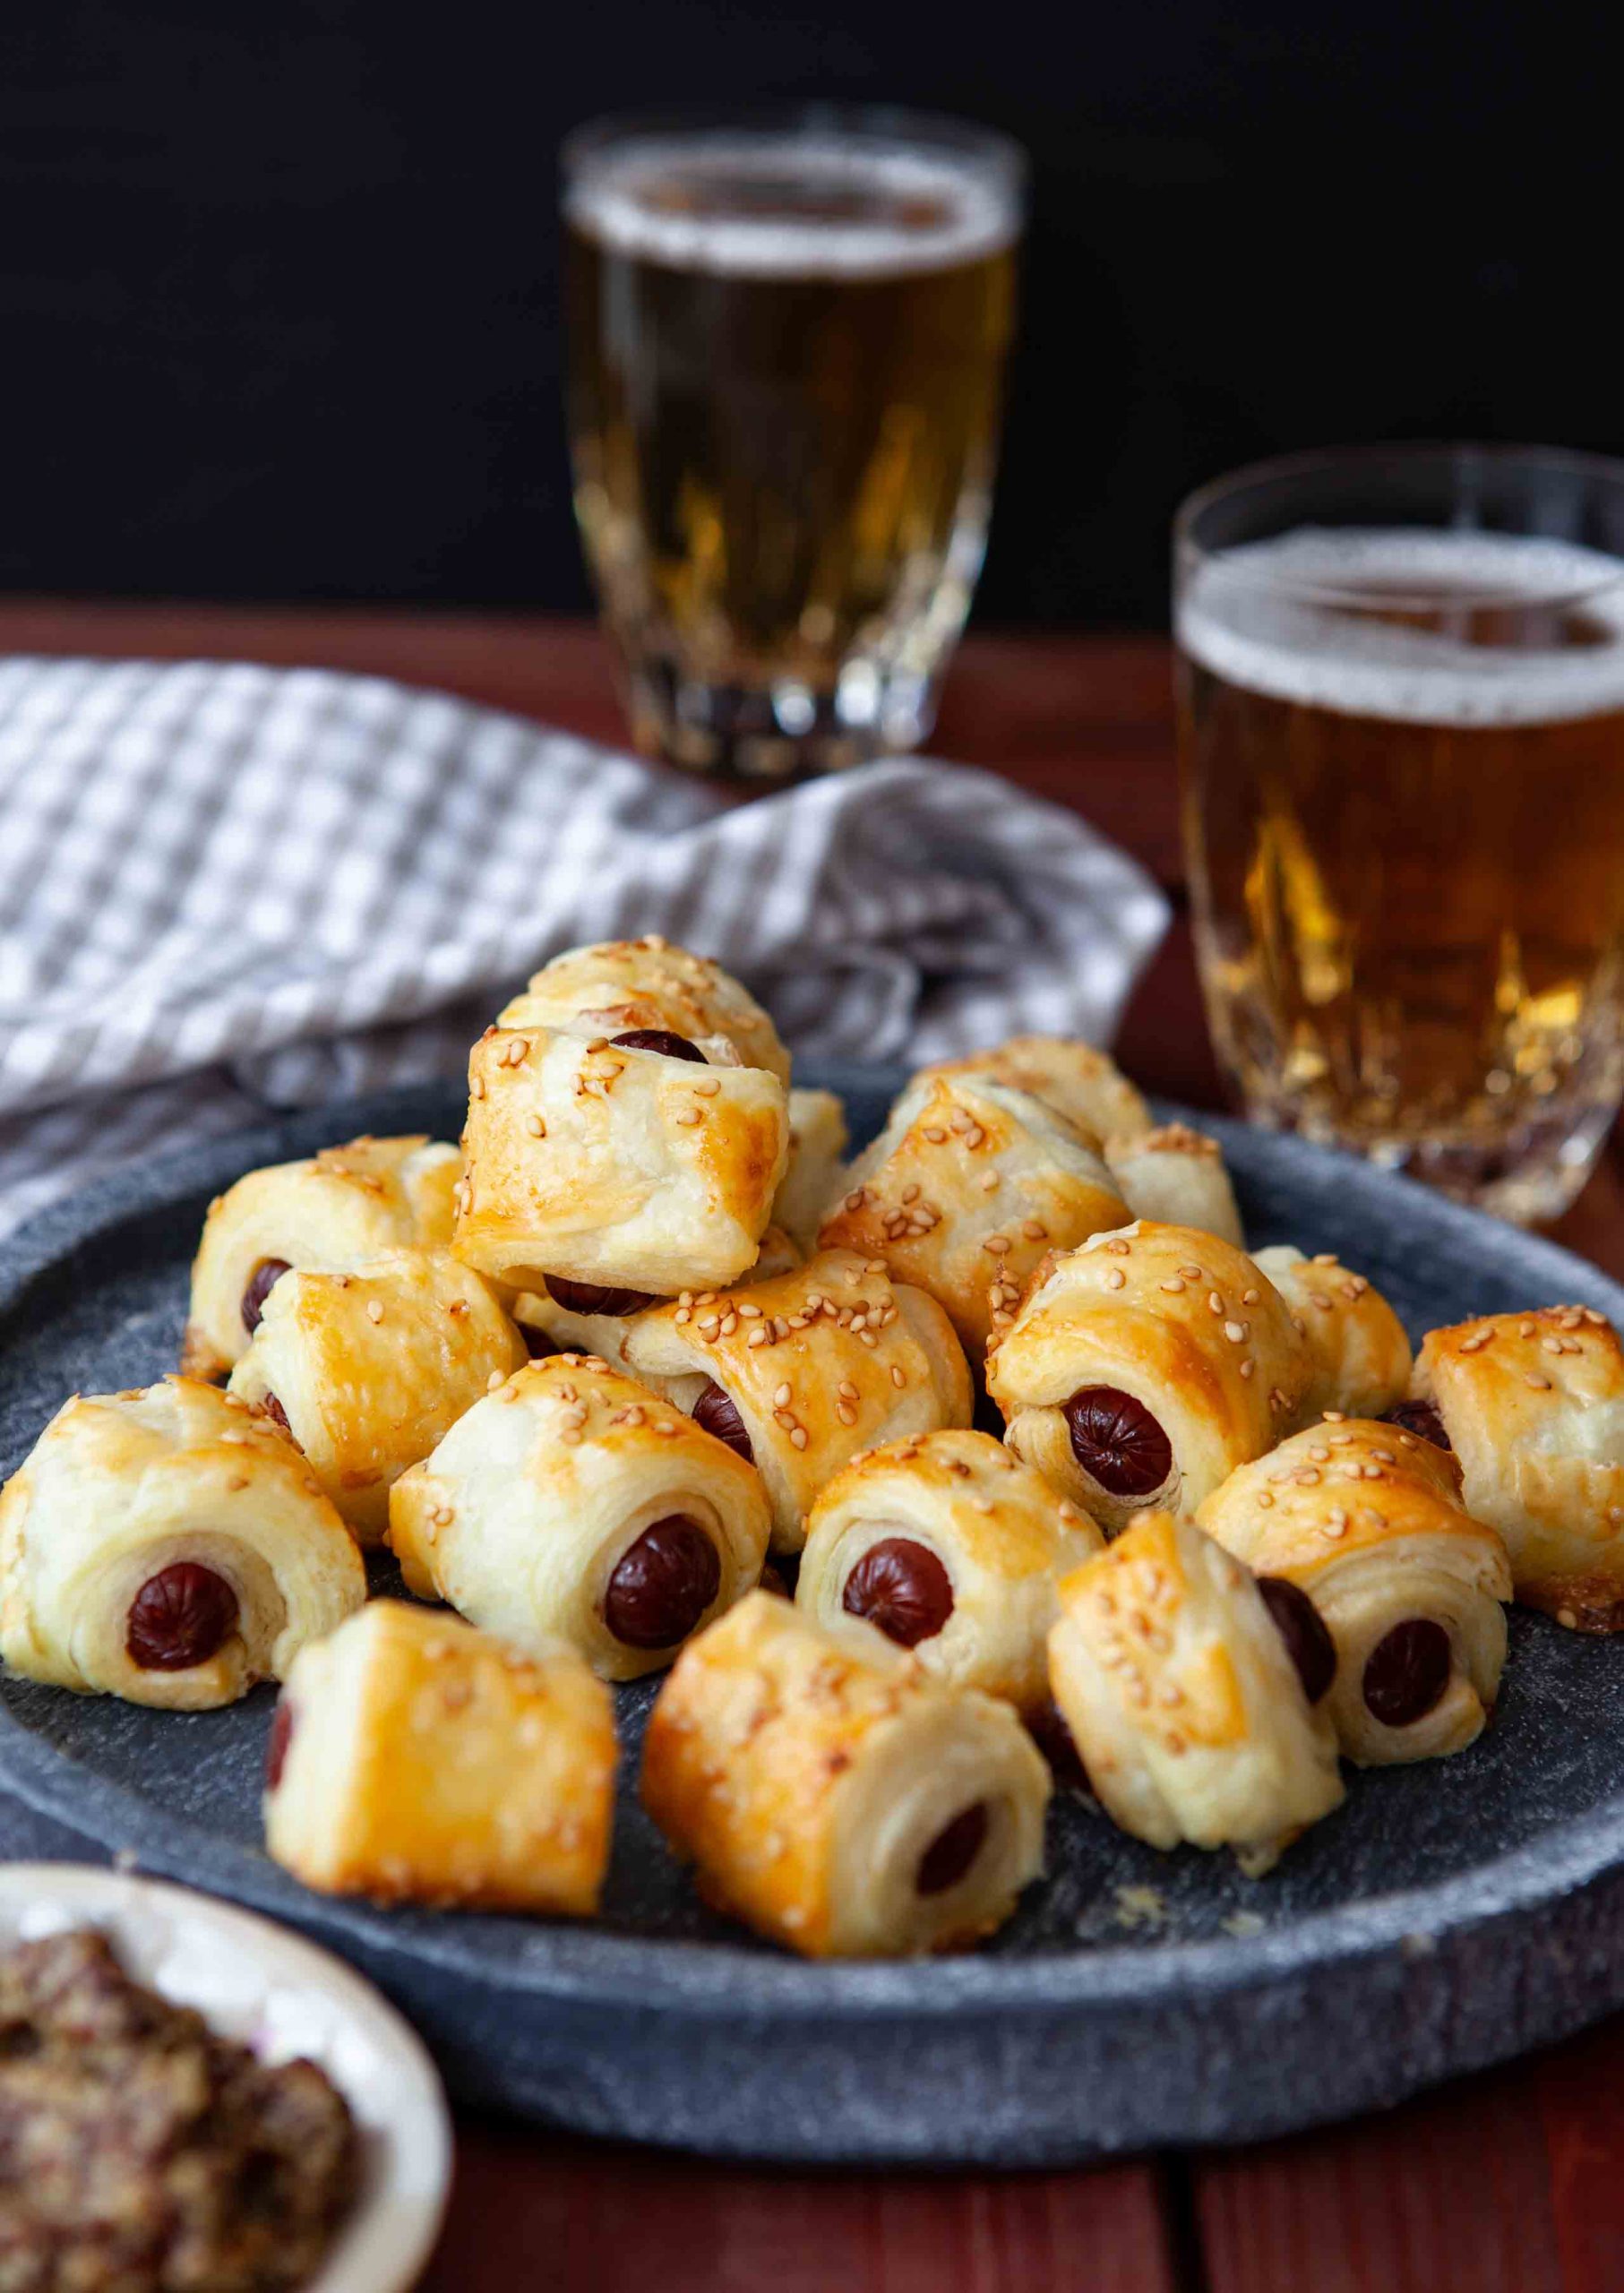 Sausage rolls on a plate next to a glass of beer.